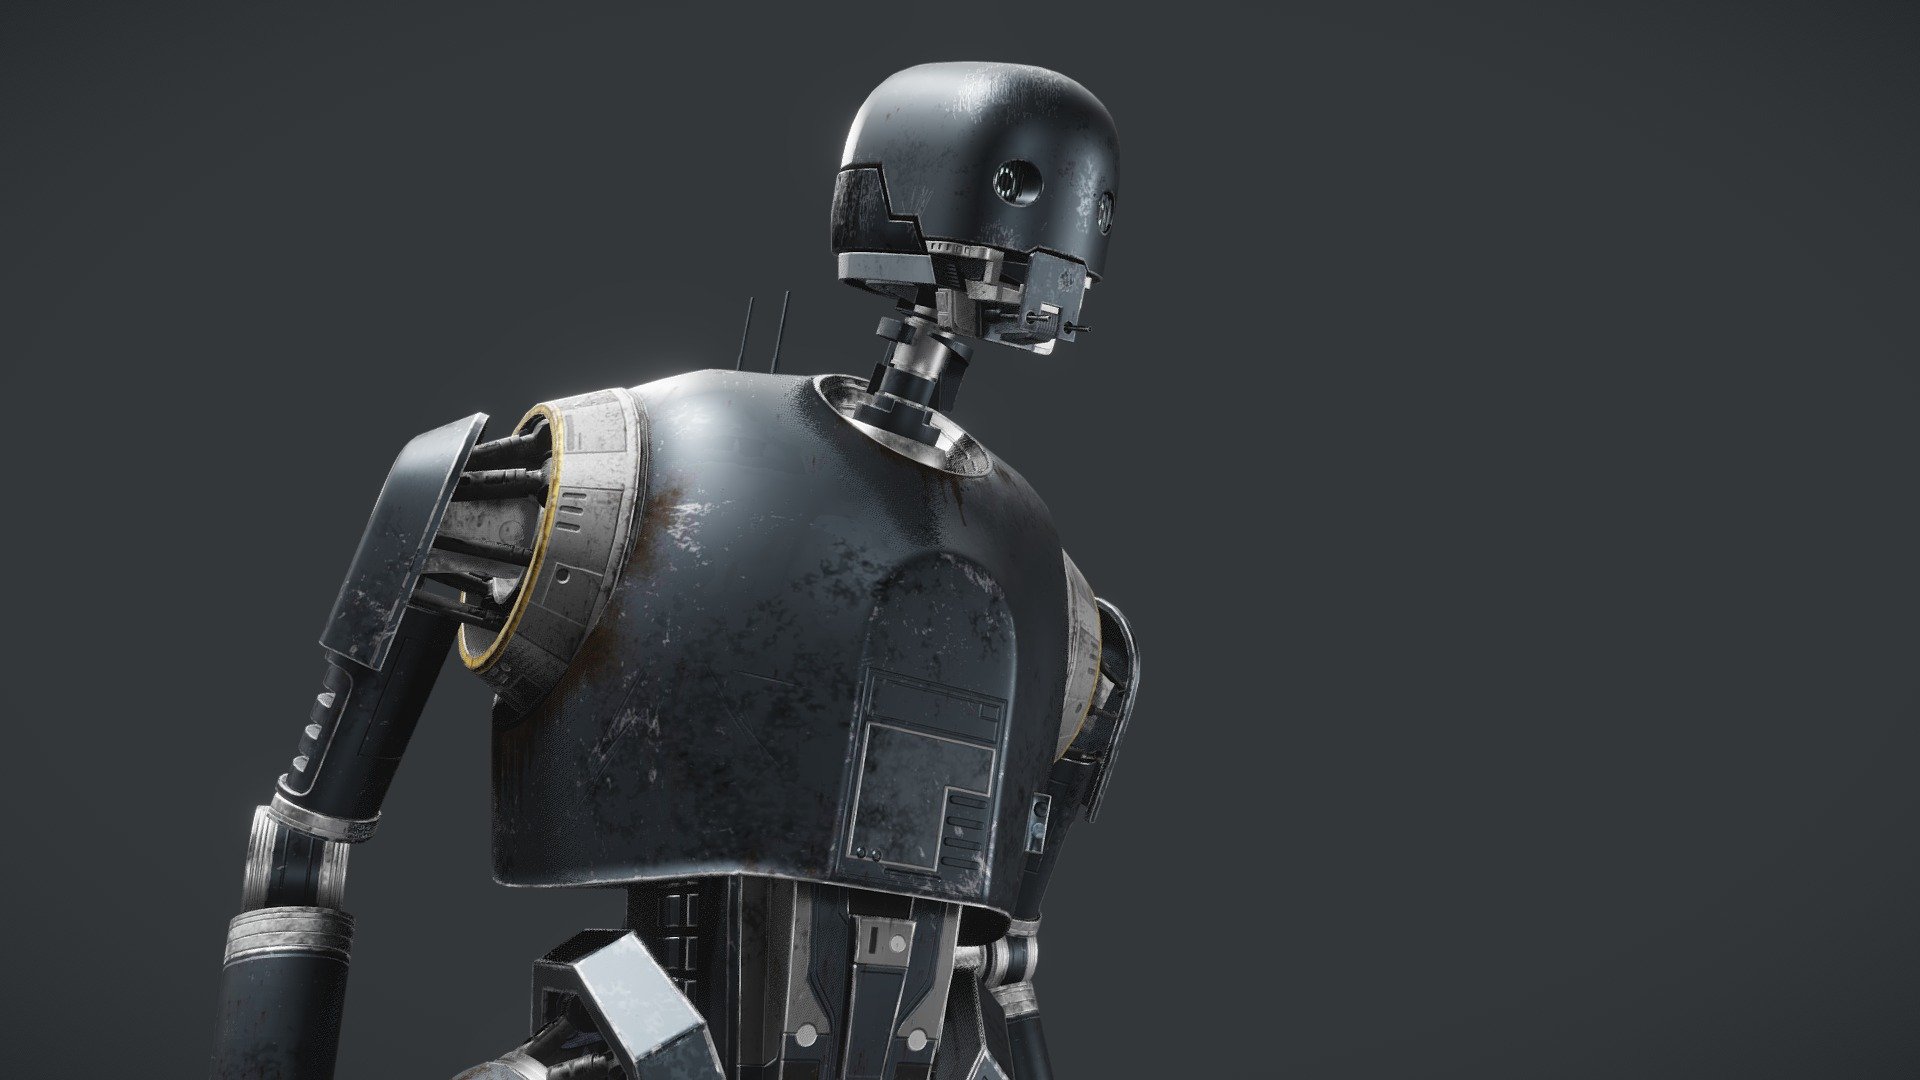 Fanart based on a droid from Star Wars: Rouge One movie- K-2SO. Fully rigged, with working piston mechanics. Modelled and rigged in Blender, textured in Substance Painter - K-2SO fanart from Star Wars: Rouge One - 3D model by mikmlonek 3d model